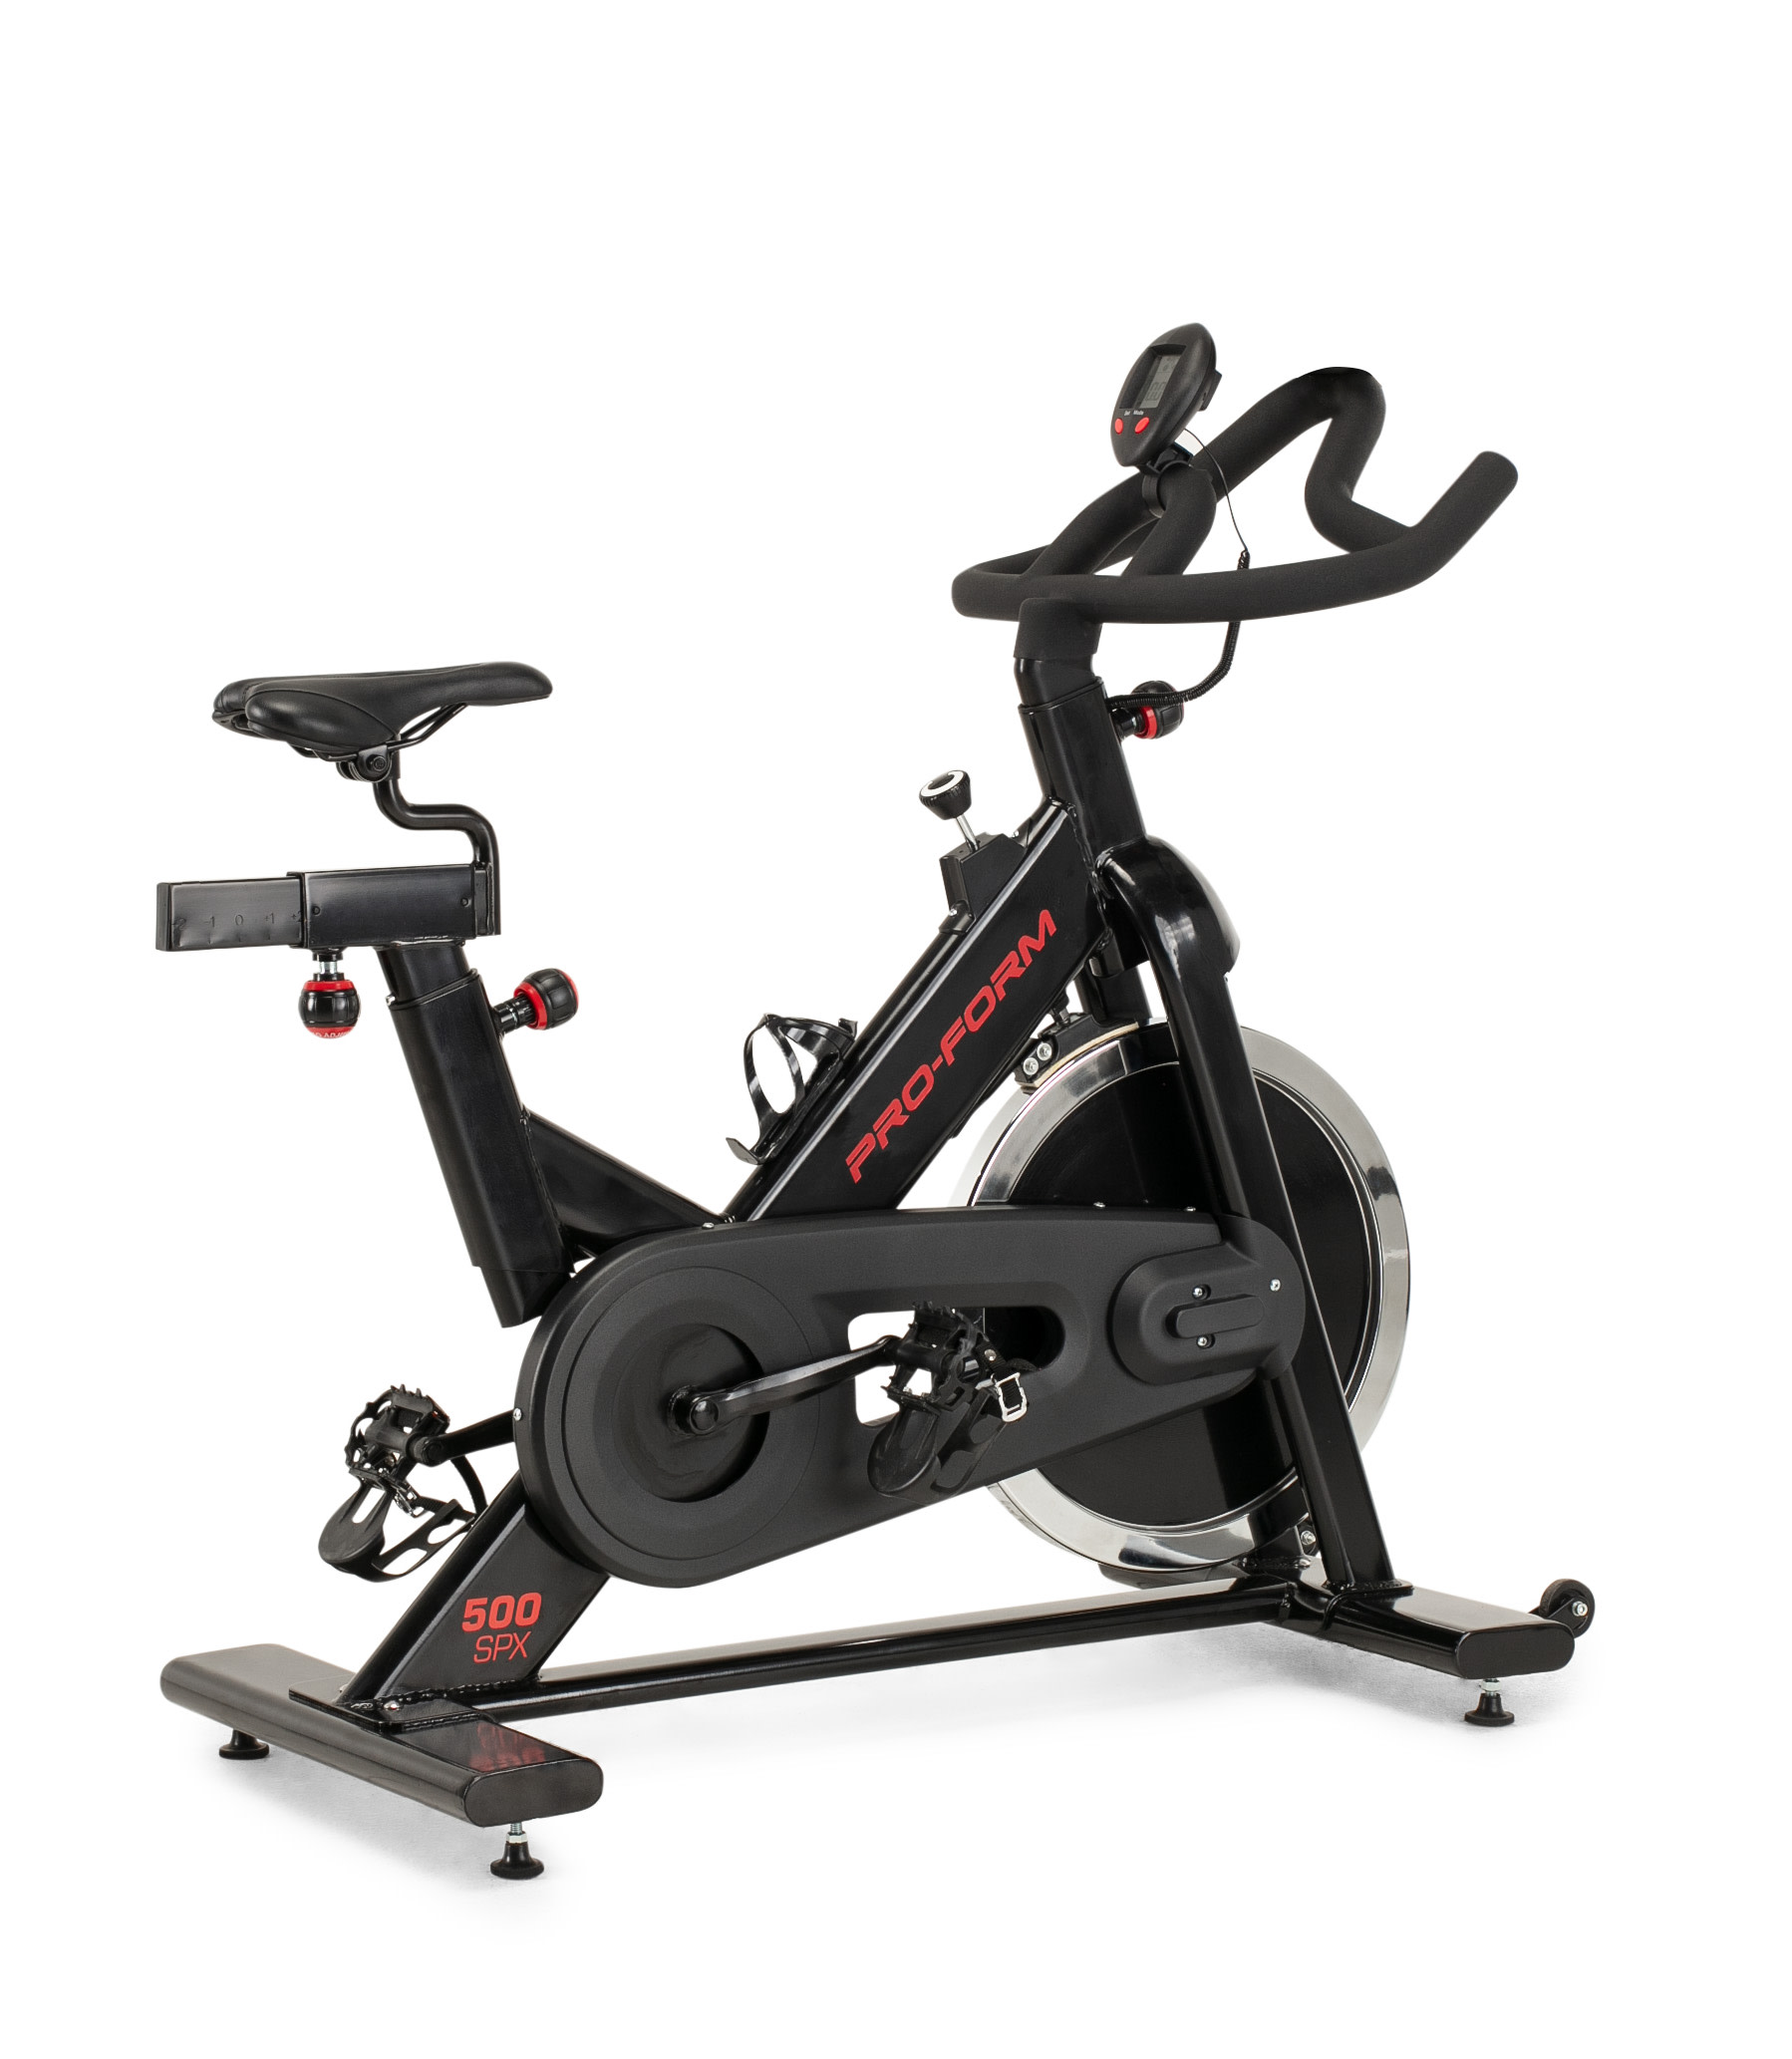 ProForm 500 SPX Indoor Cycle with Interchangeable Racing Seat - image 1 of 14